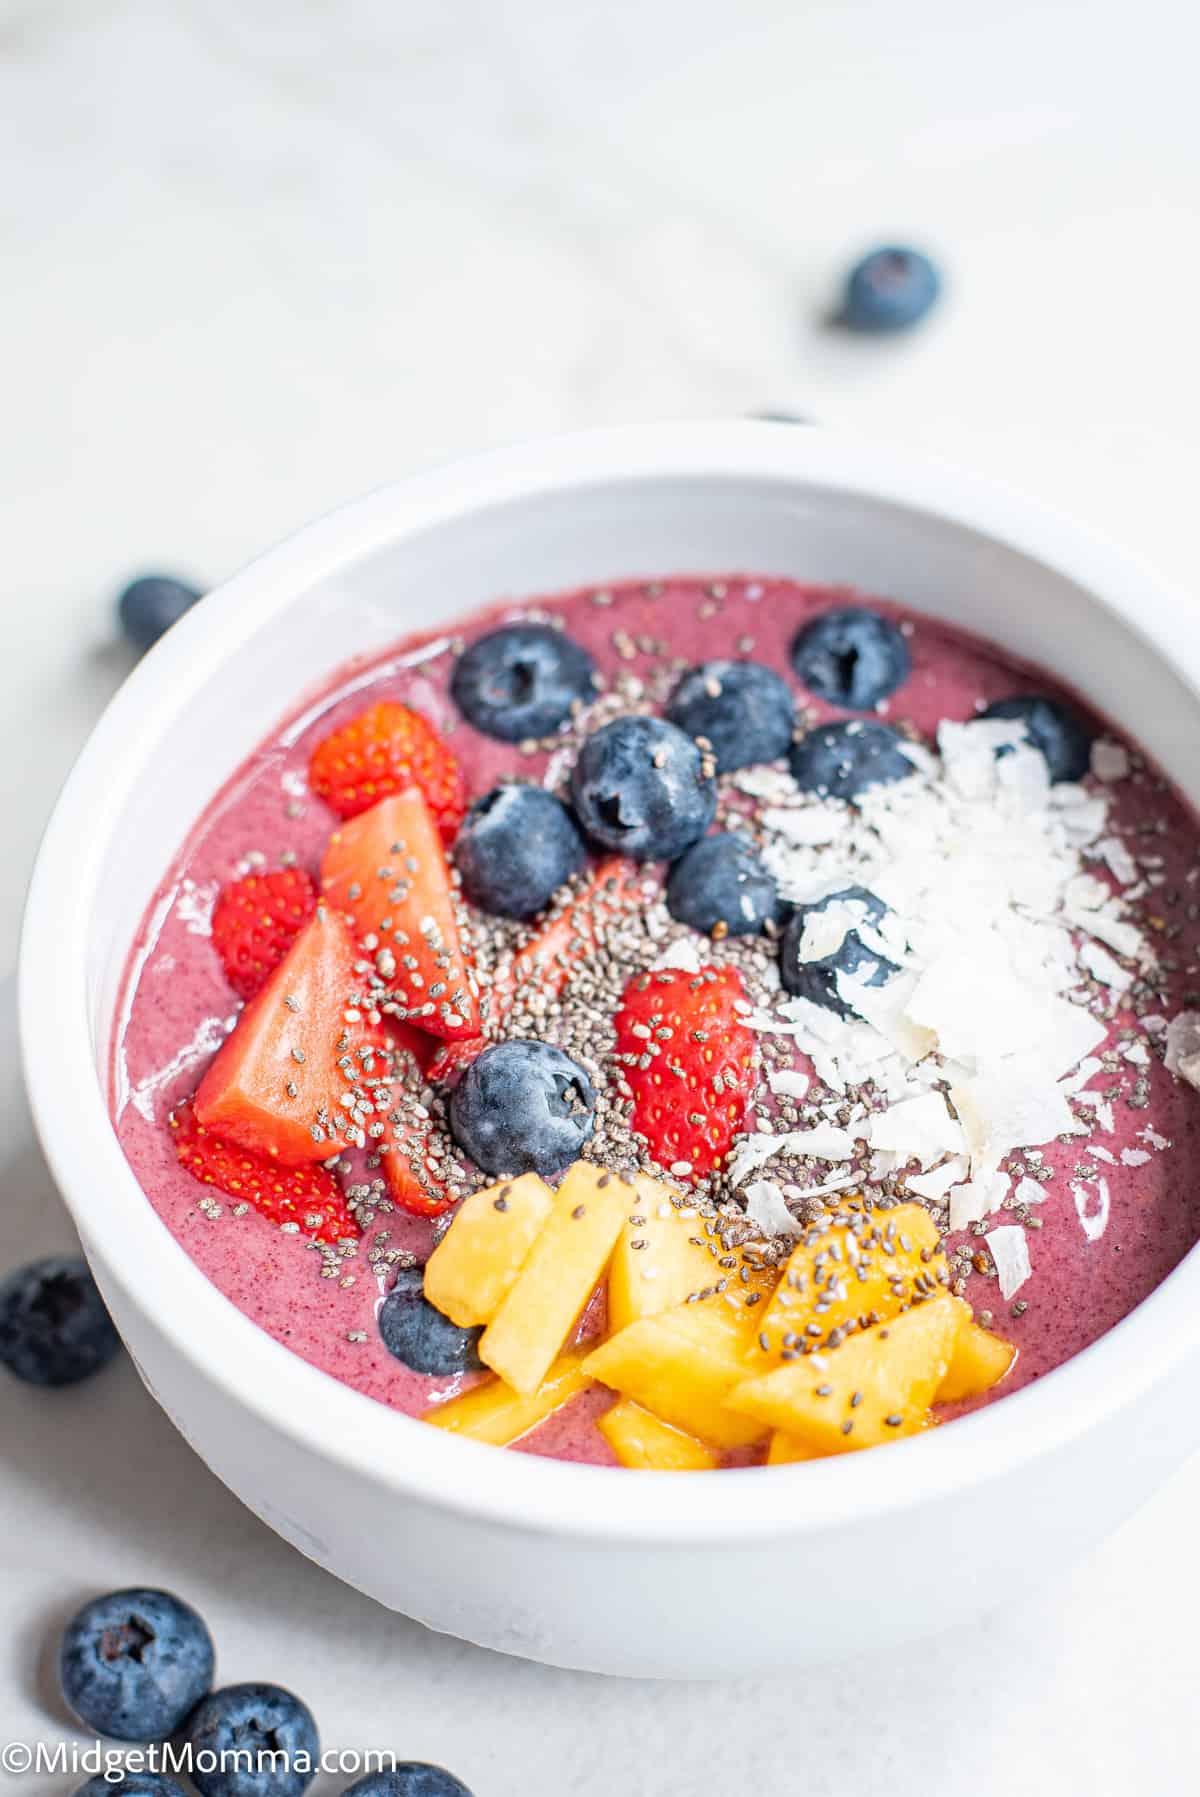 Superfood Smoothie Cubes (Make Ahead Breakfast) - From My Bowl